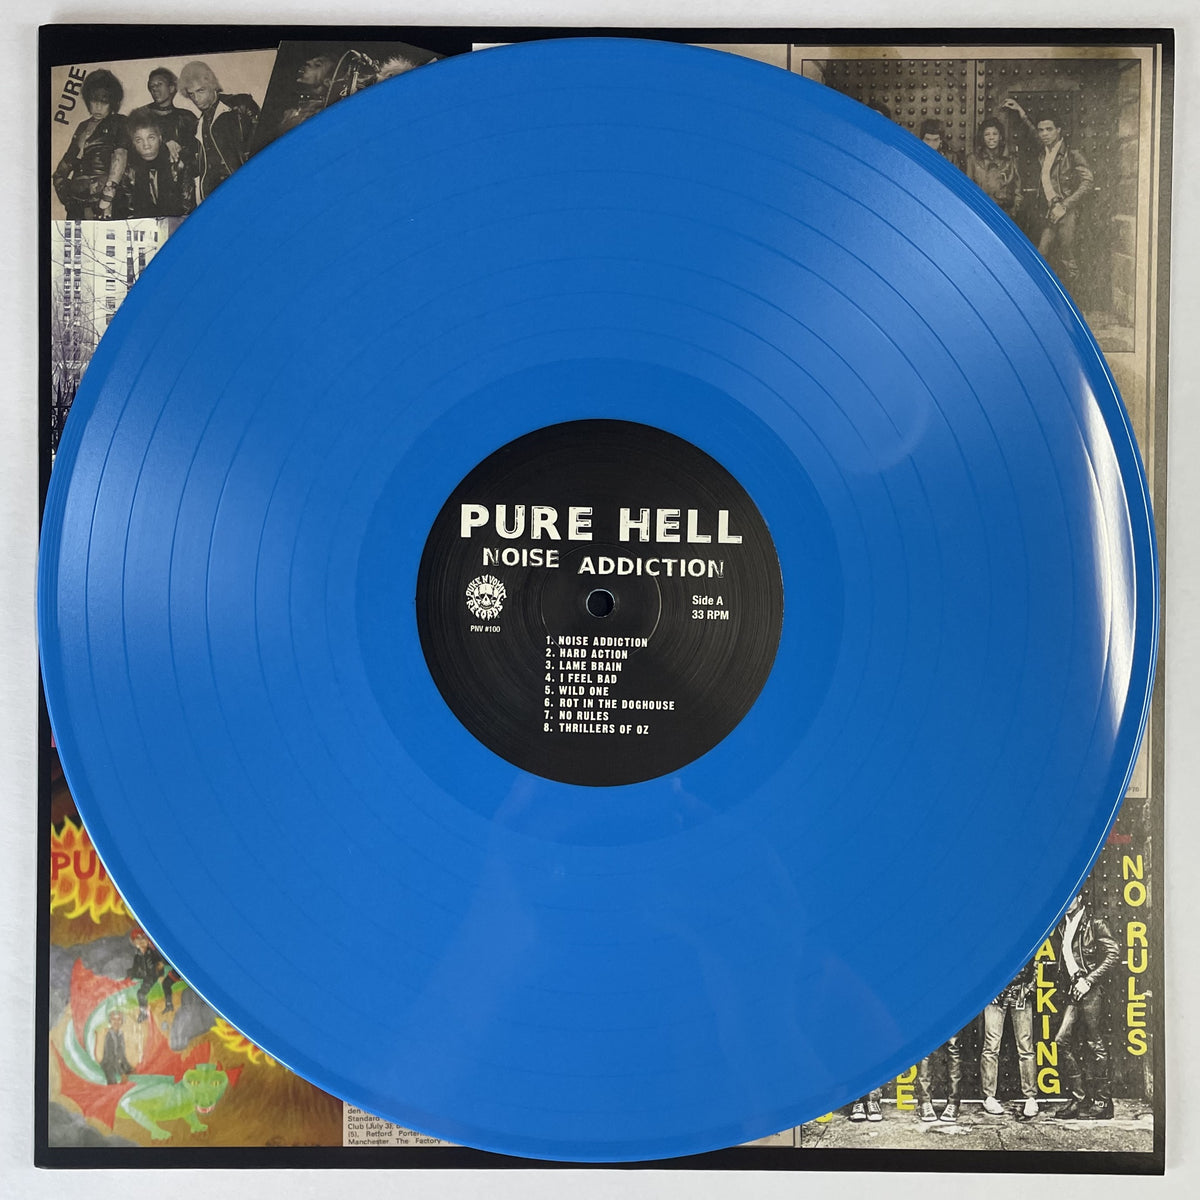 Buy Pure Hell Noise Addiction Lp Album Re Online For A Great